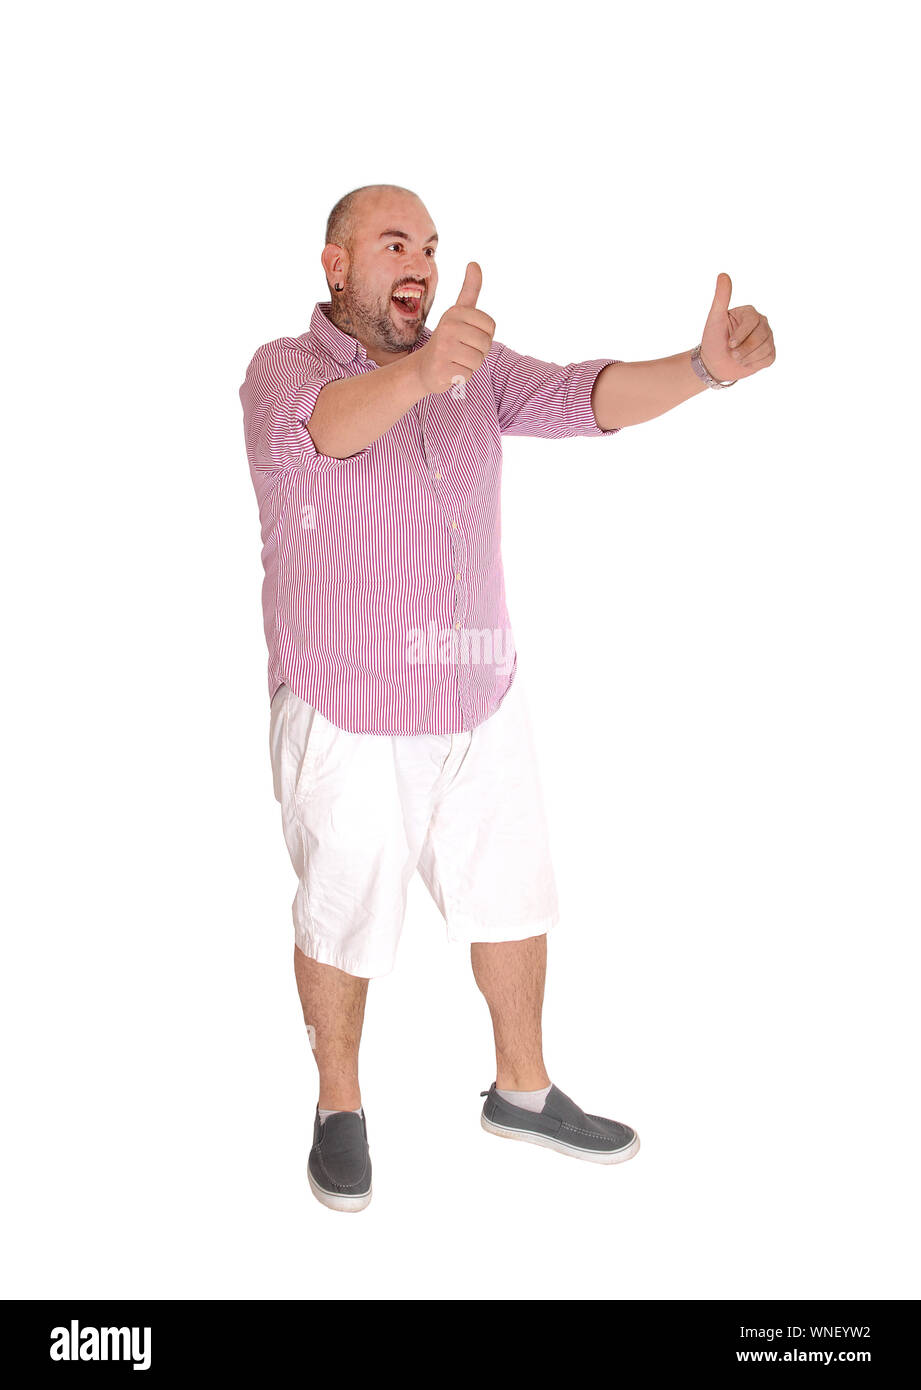 A Hispanic man standing in white shots and a striped shirt stretched  out his arm with thumps up, isolated for white background Stock Photo